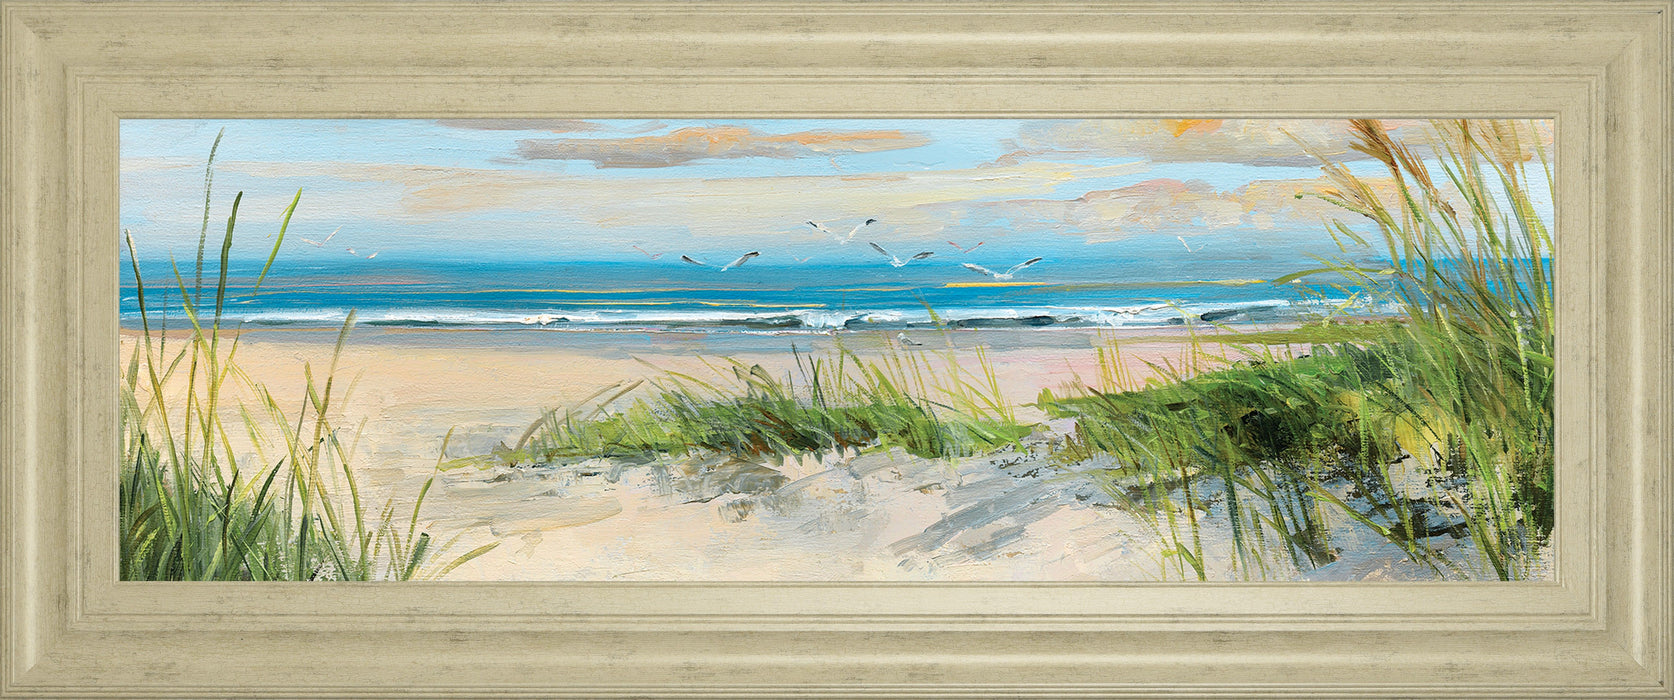 Catching The Wind Il By Sally Swatland - Framed Print Wall Art - Blue